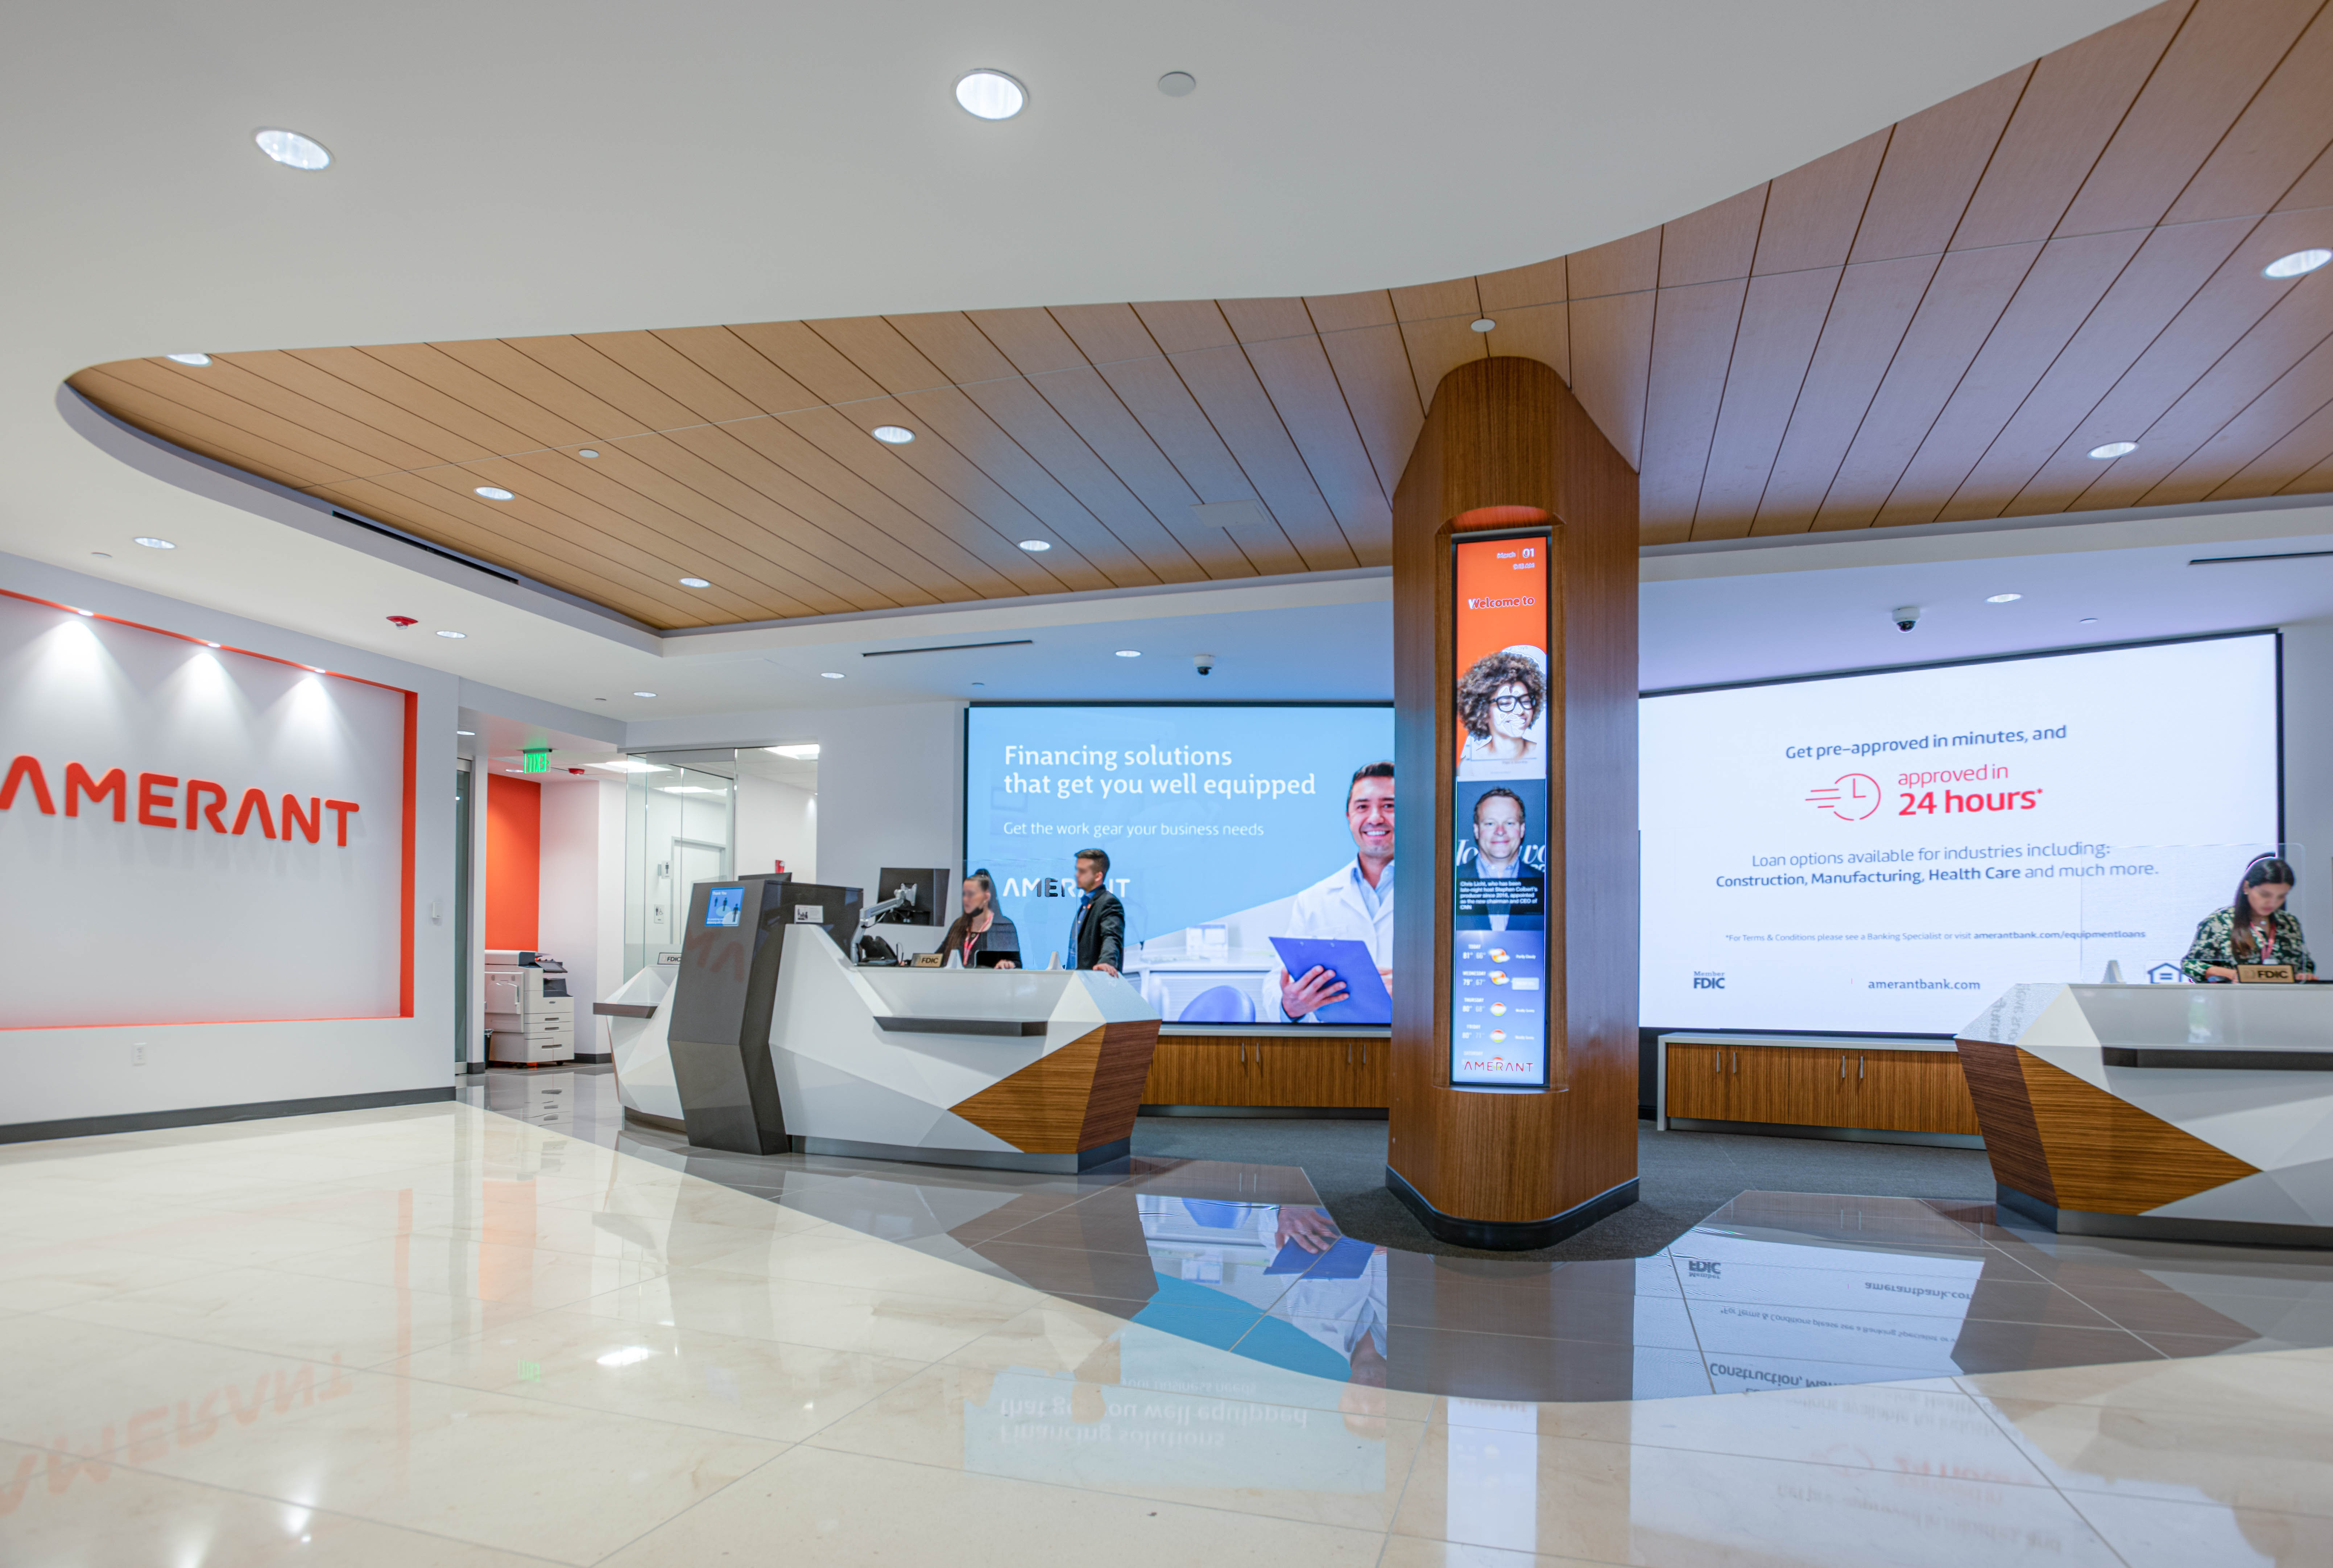 How Digital Signage Promotes Financial Literacy and Improves Client Experience